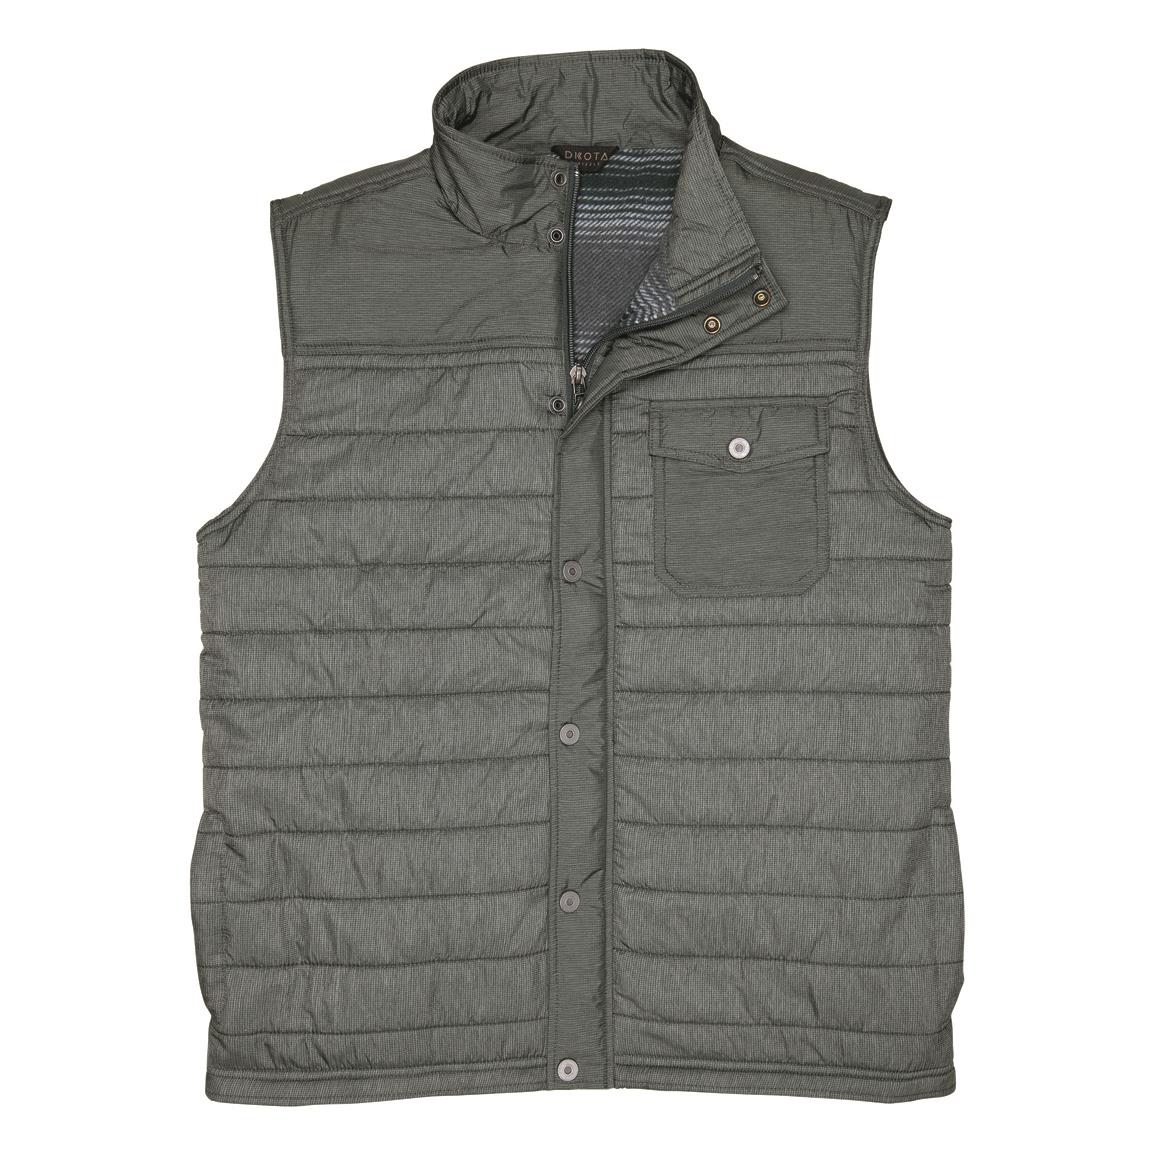 DKOTA GRIZZLY Men's Locke Insulated Lined Vest, Crocodile